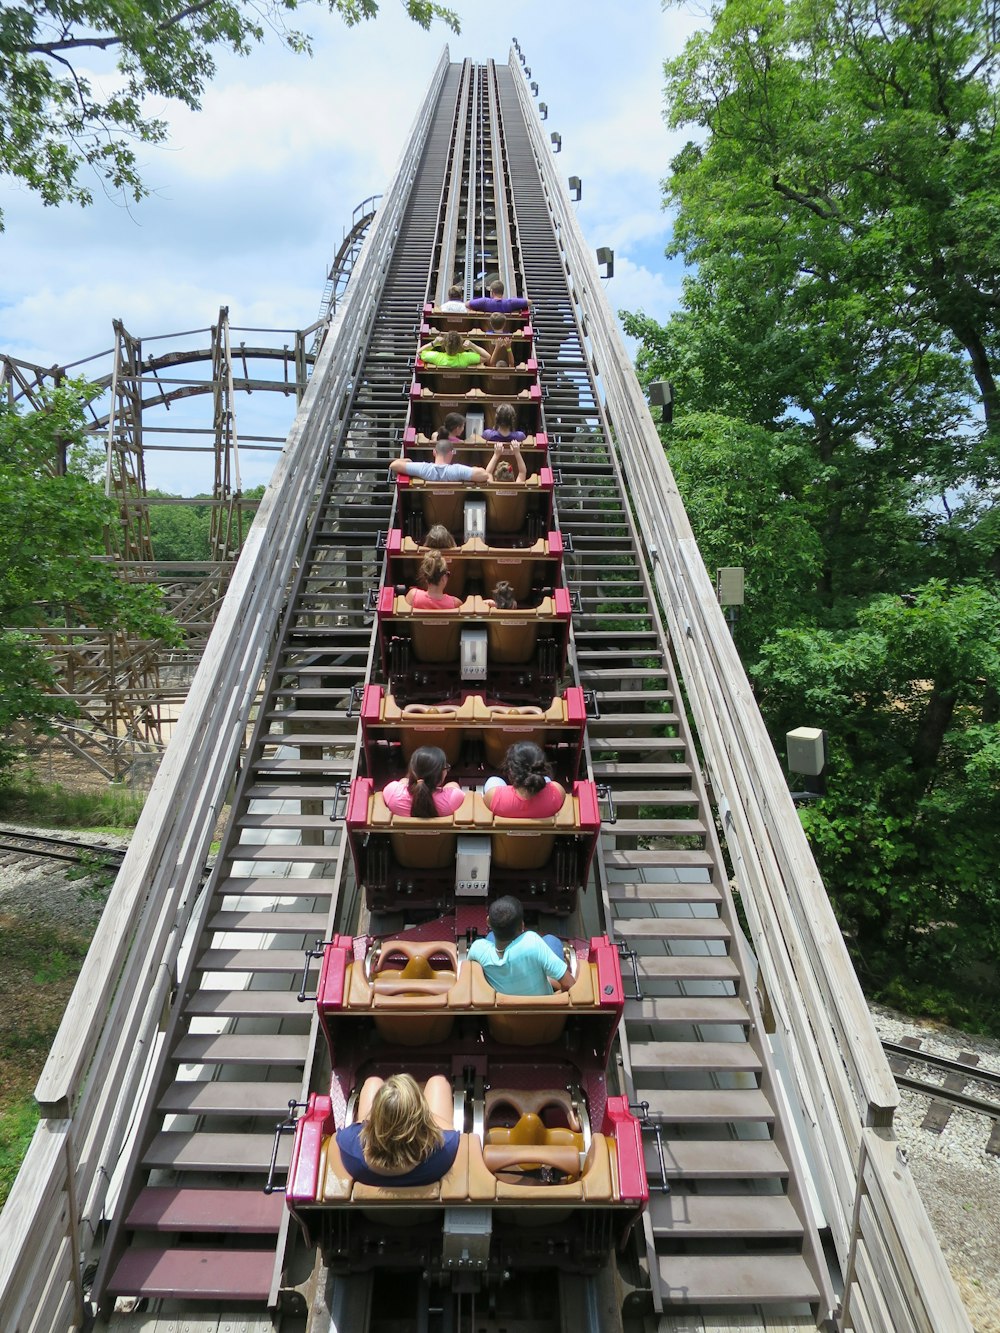 a roller coaster with people sitting on it